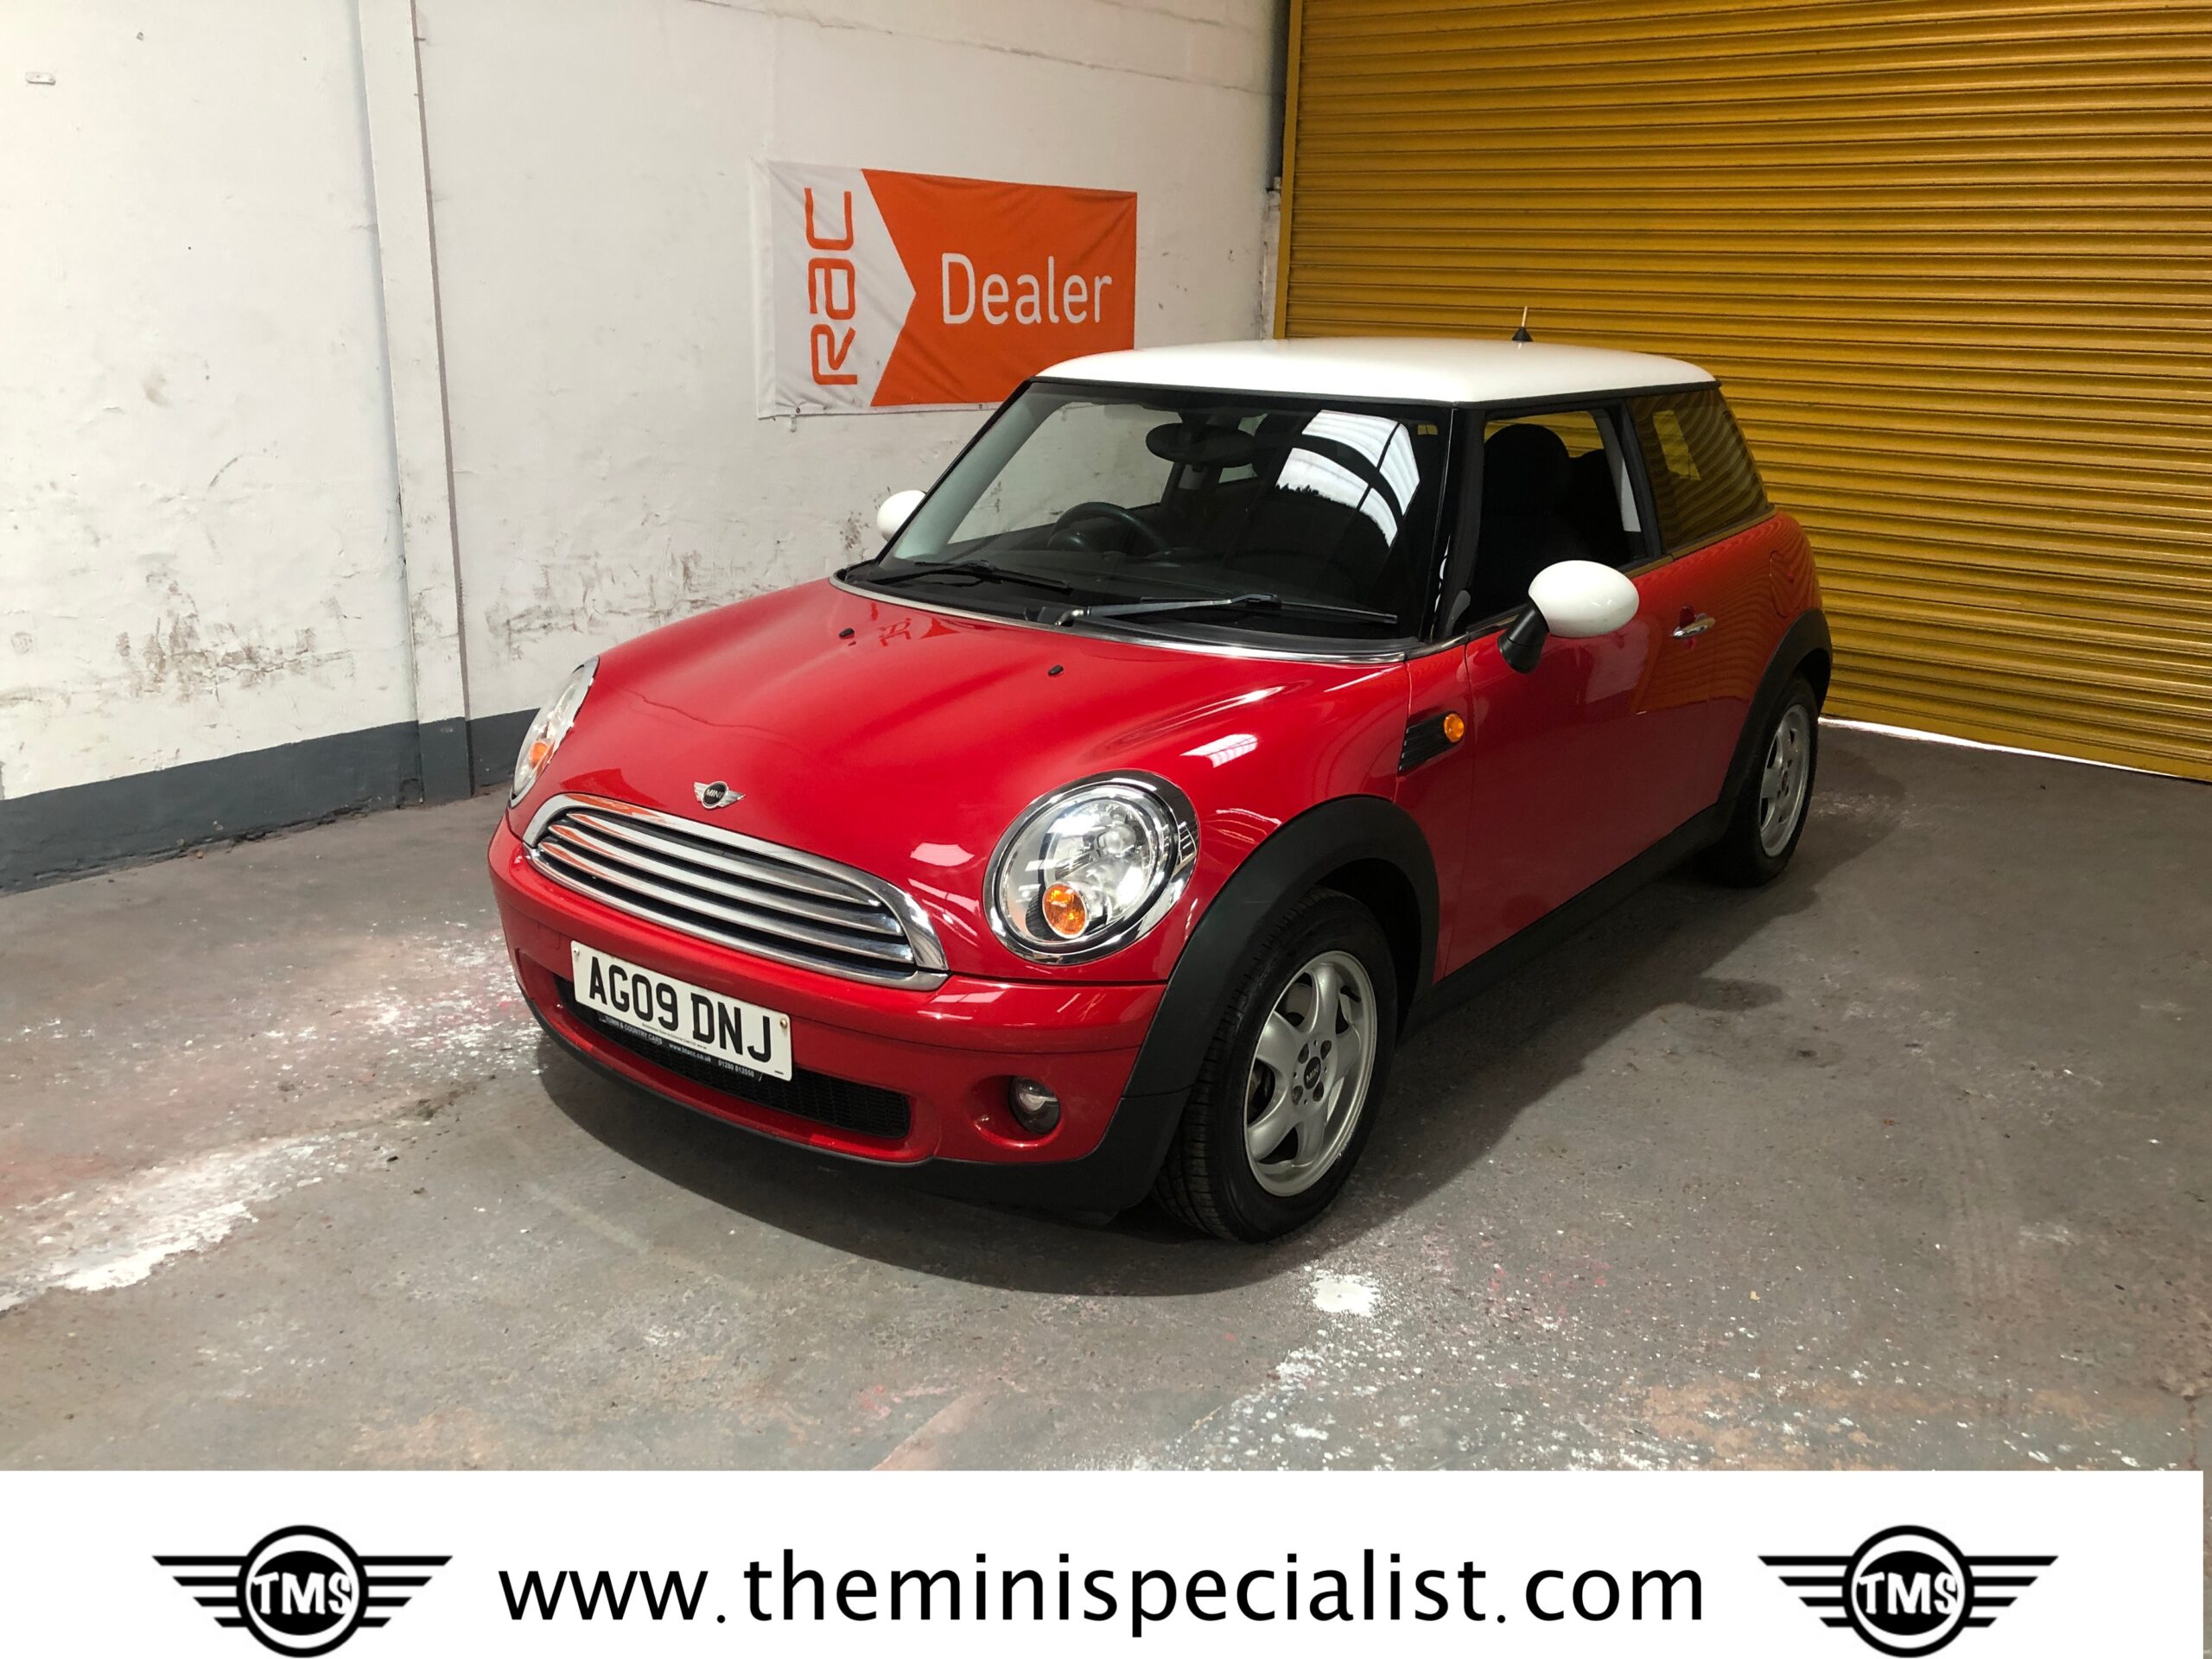 SOLD - 2009 (09) MINI Cooper in Chili Red with only 75,800 miles from new -  The Mini Specialist - Mini Sales and Servicing